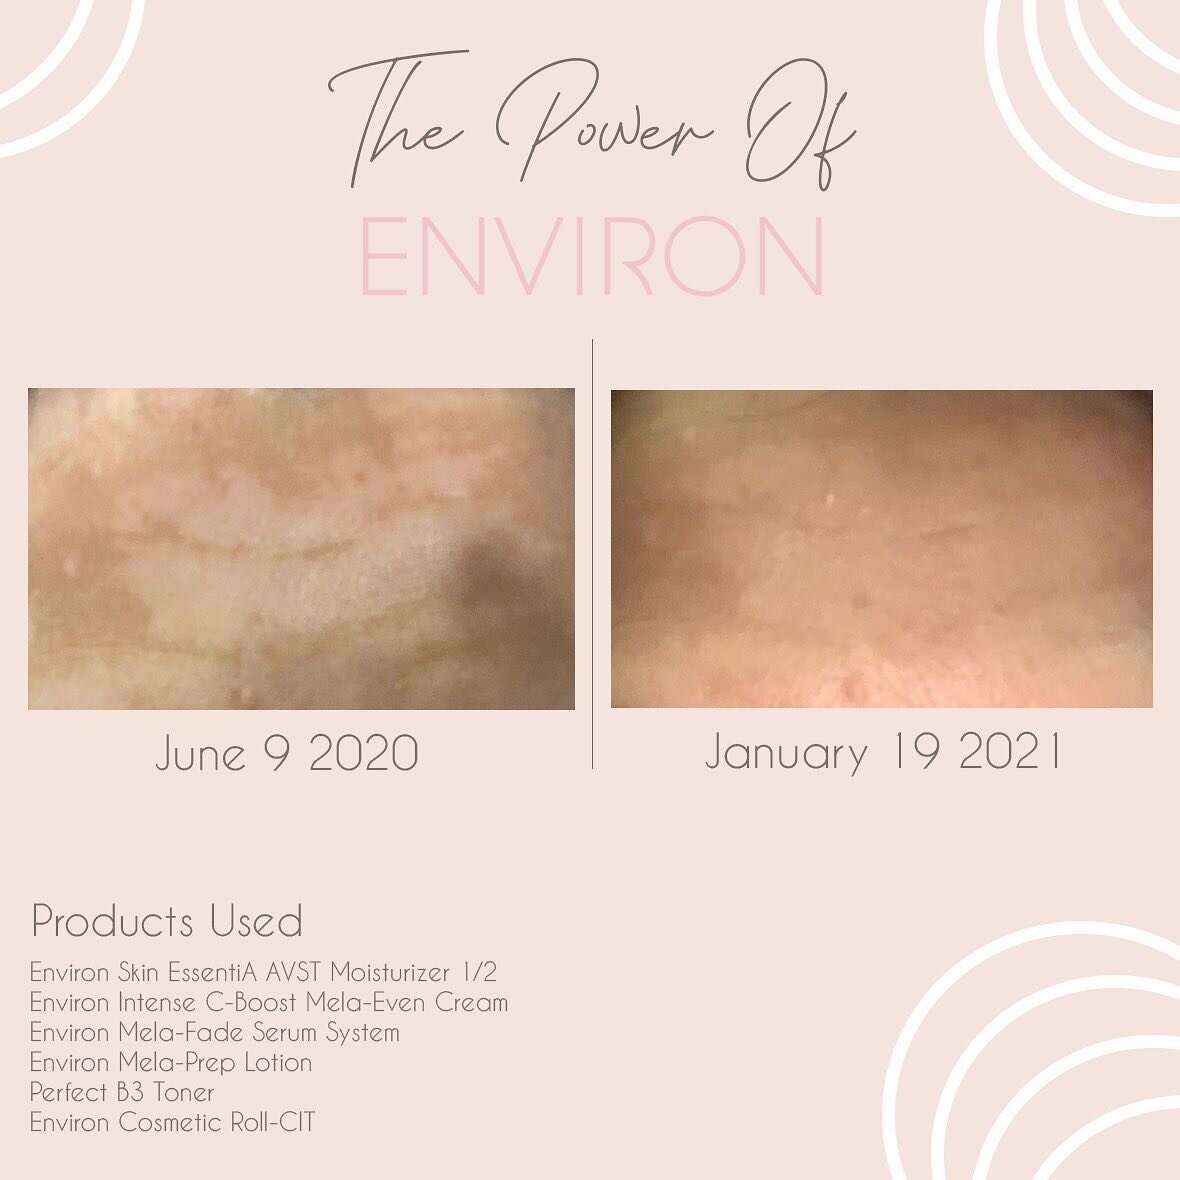 This is a before and after of my client, just 7 months on Environ. This client came to me with SEVERE melasma and sun damage. We introduced AVST, derma-roller, and the Radiance products (listed) and her melasma is 70-80 % gone.  If you have suffered 